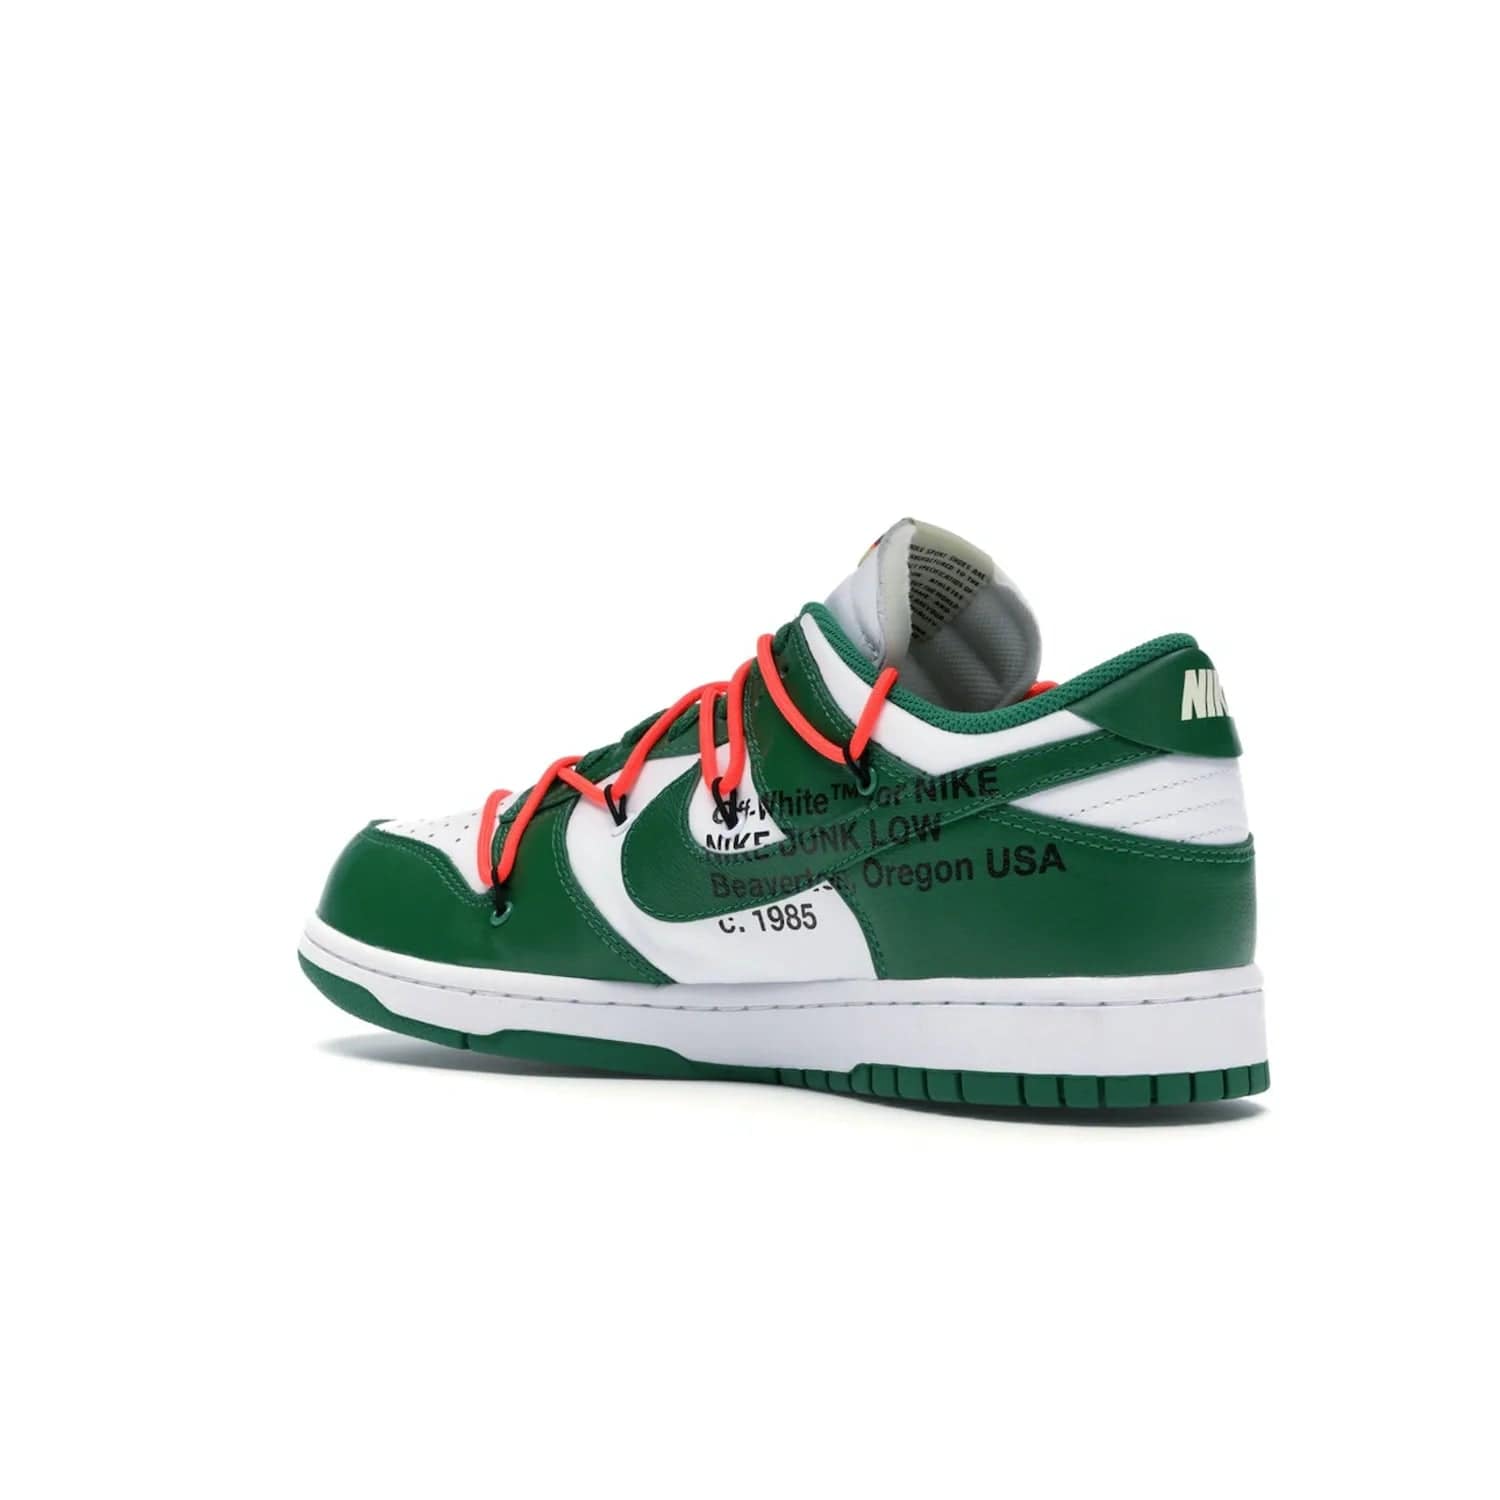 Nike Dunk Low Off-White Pine Green - Image 23 - Only at www.BallersClubKickz.com - The Nike Dunk Low Off-White Pine Green combines classic 1980s style with modern-day design. Featuring white leather uppers and pine green overlays, these classic kicks feature secondary lacing system, zip-ties and signature Off-White text. Releasing in December 2019, these shoes are a timeless classic for any wardrobe.